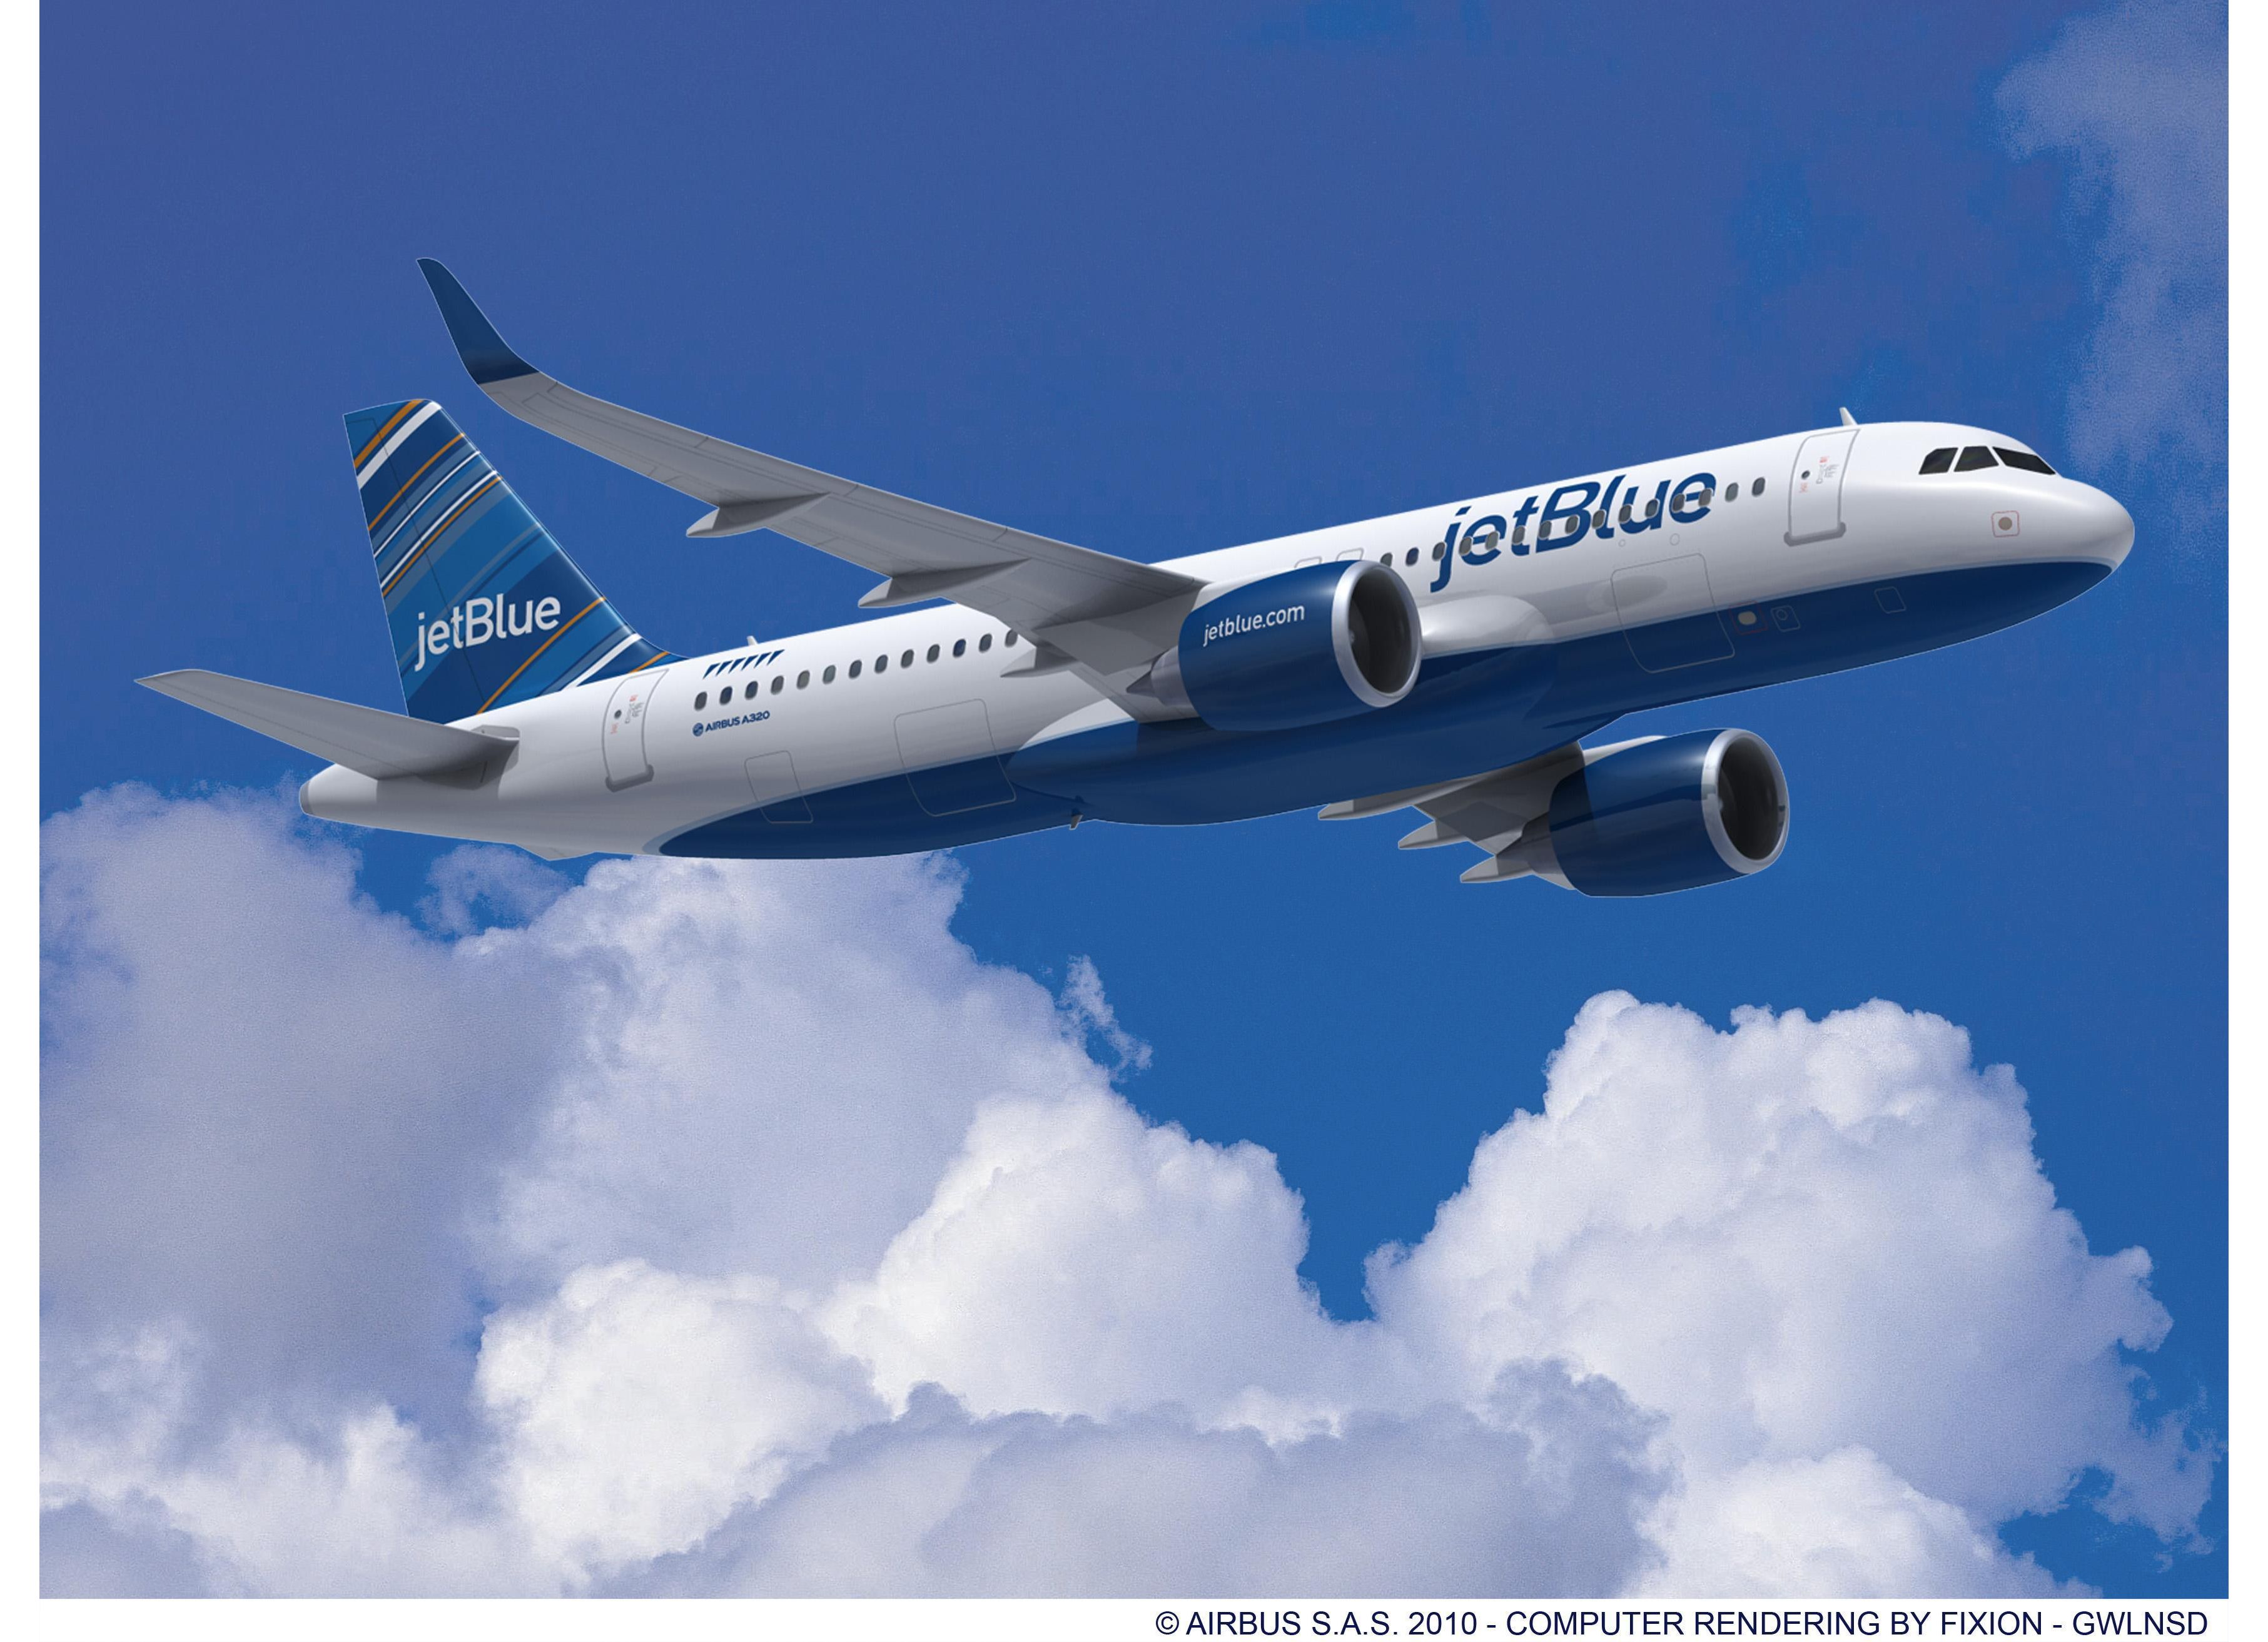 JetBlue to order 40 A320neo aircraft